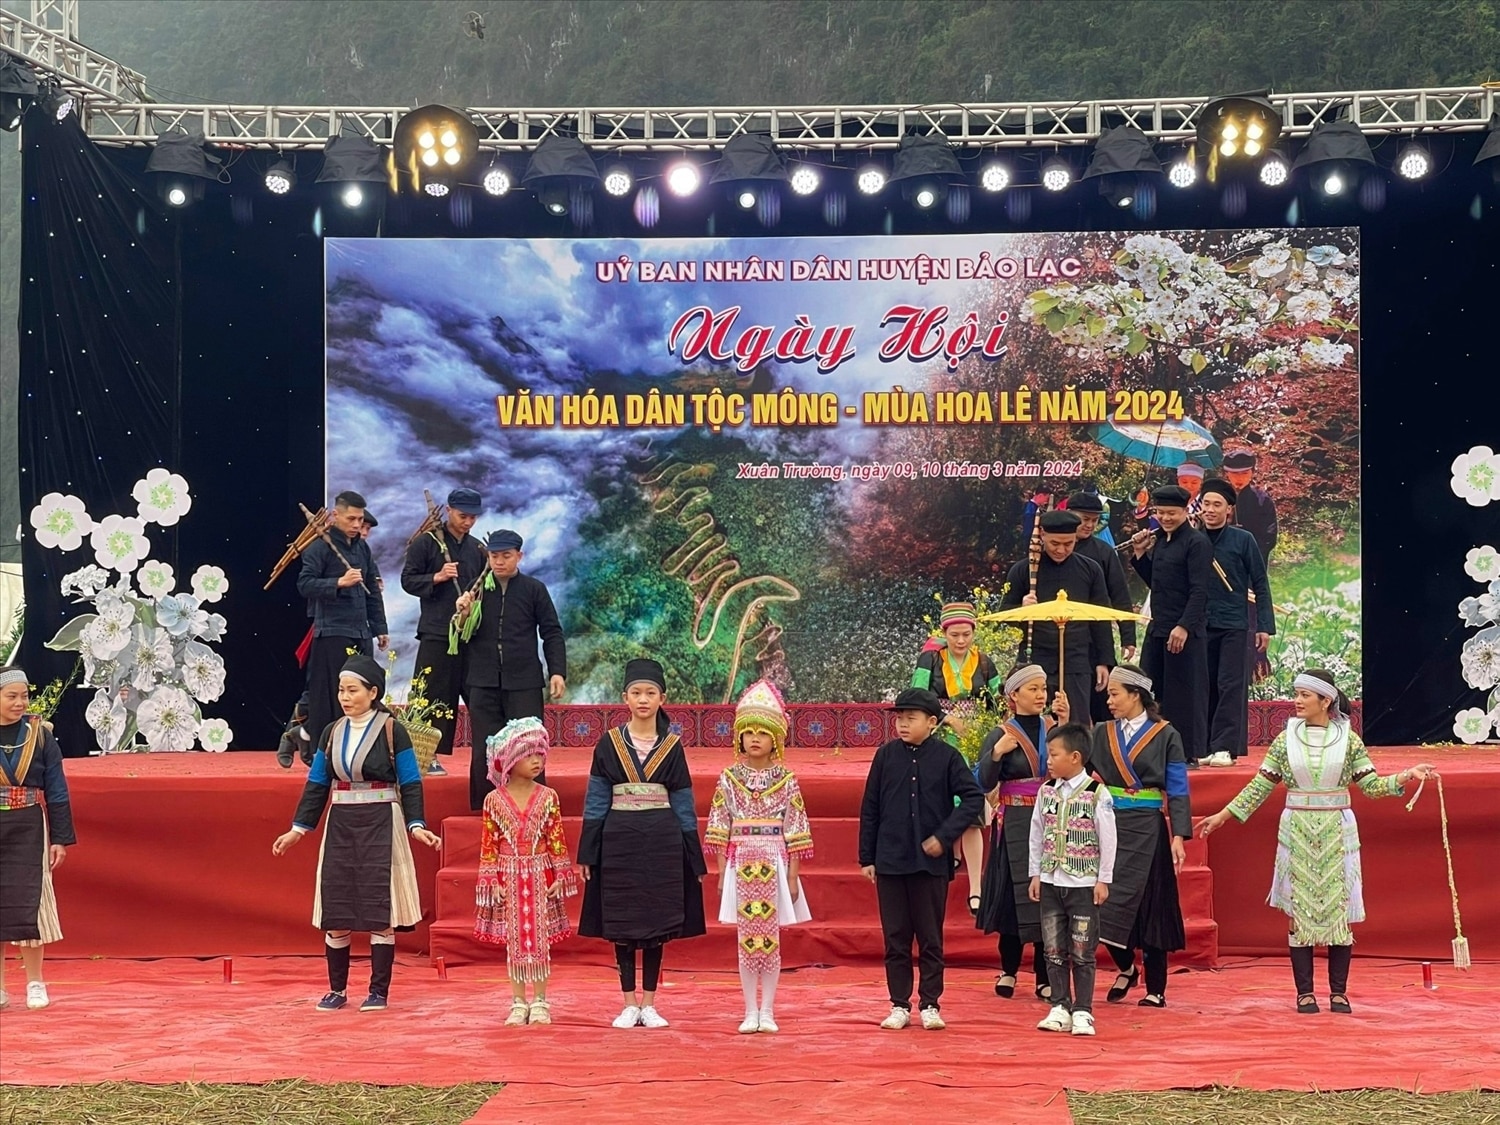 Mong Cultural Festival 2024 is organized by Bao Lac district in Xuan Truong border commune